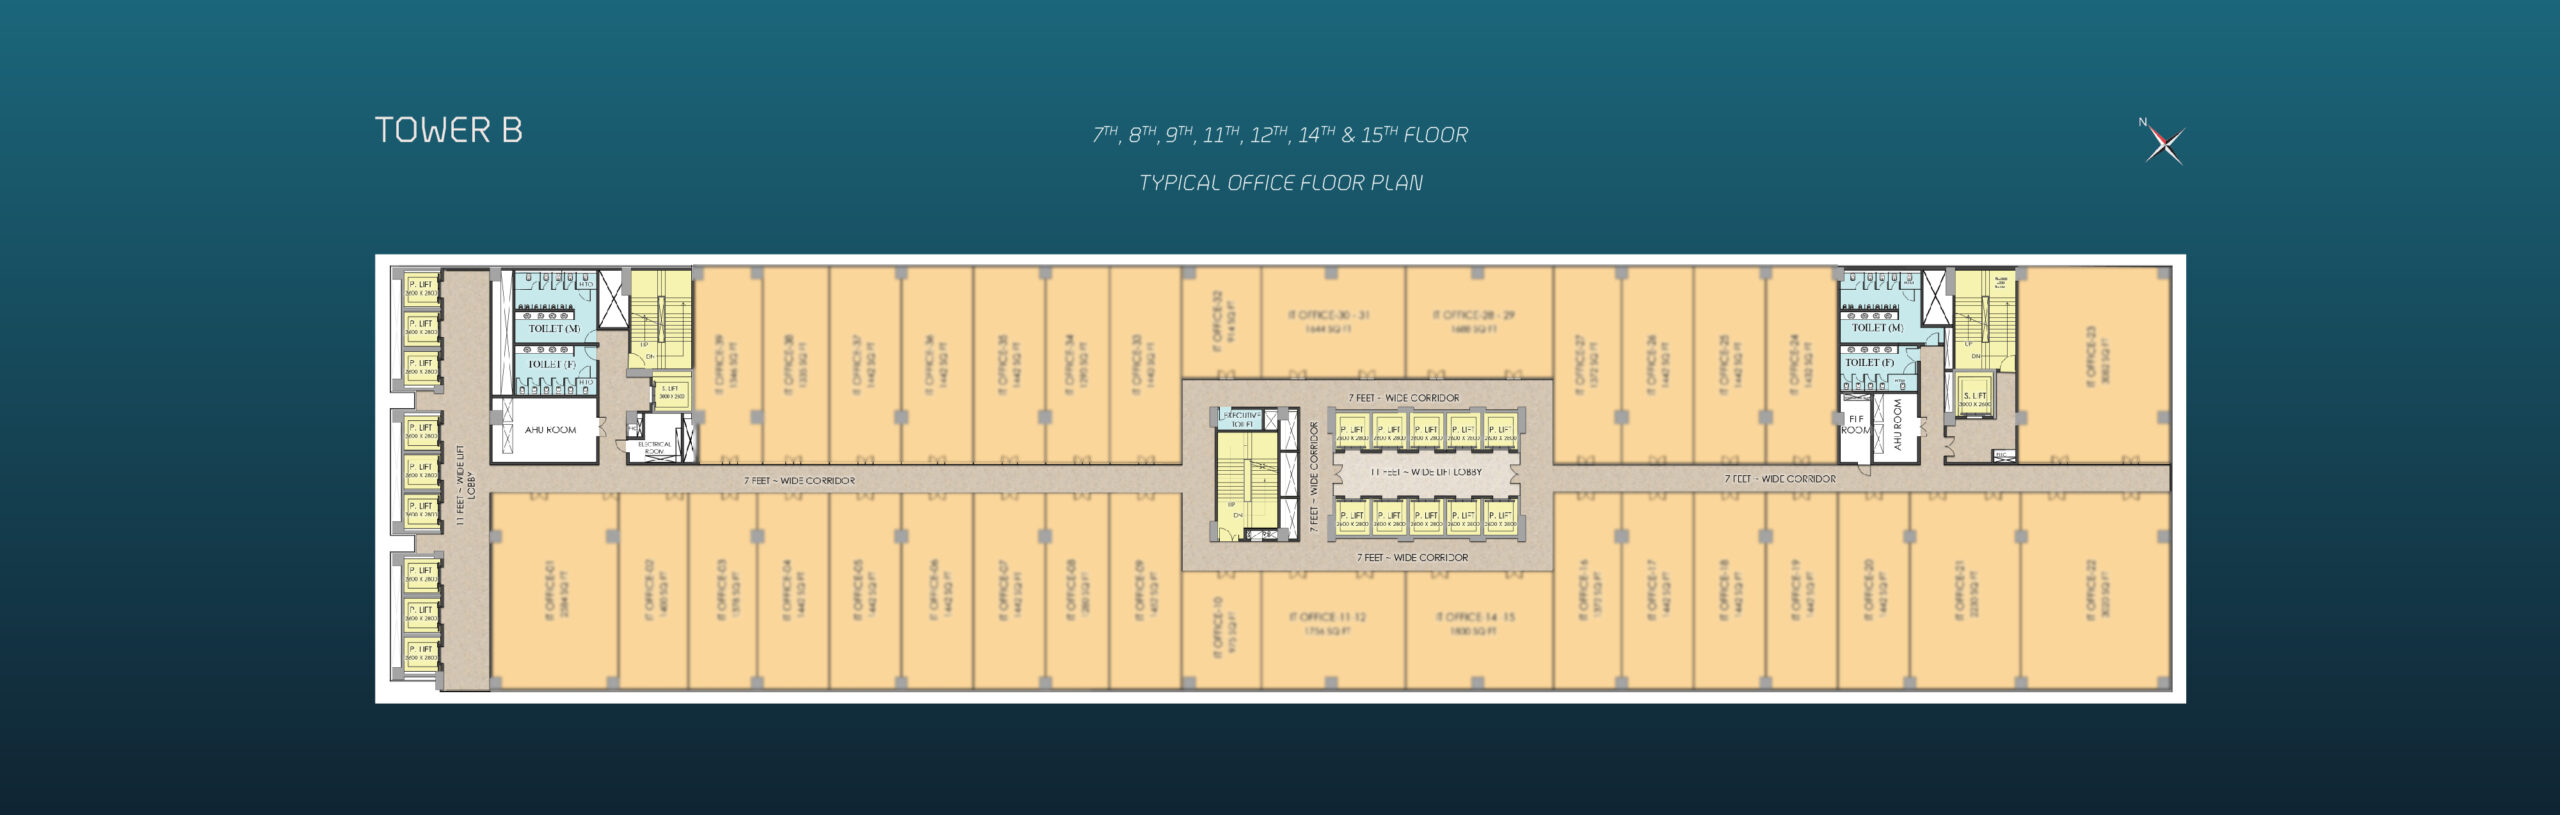 One FNG Tower B Office Floor Plan